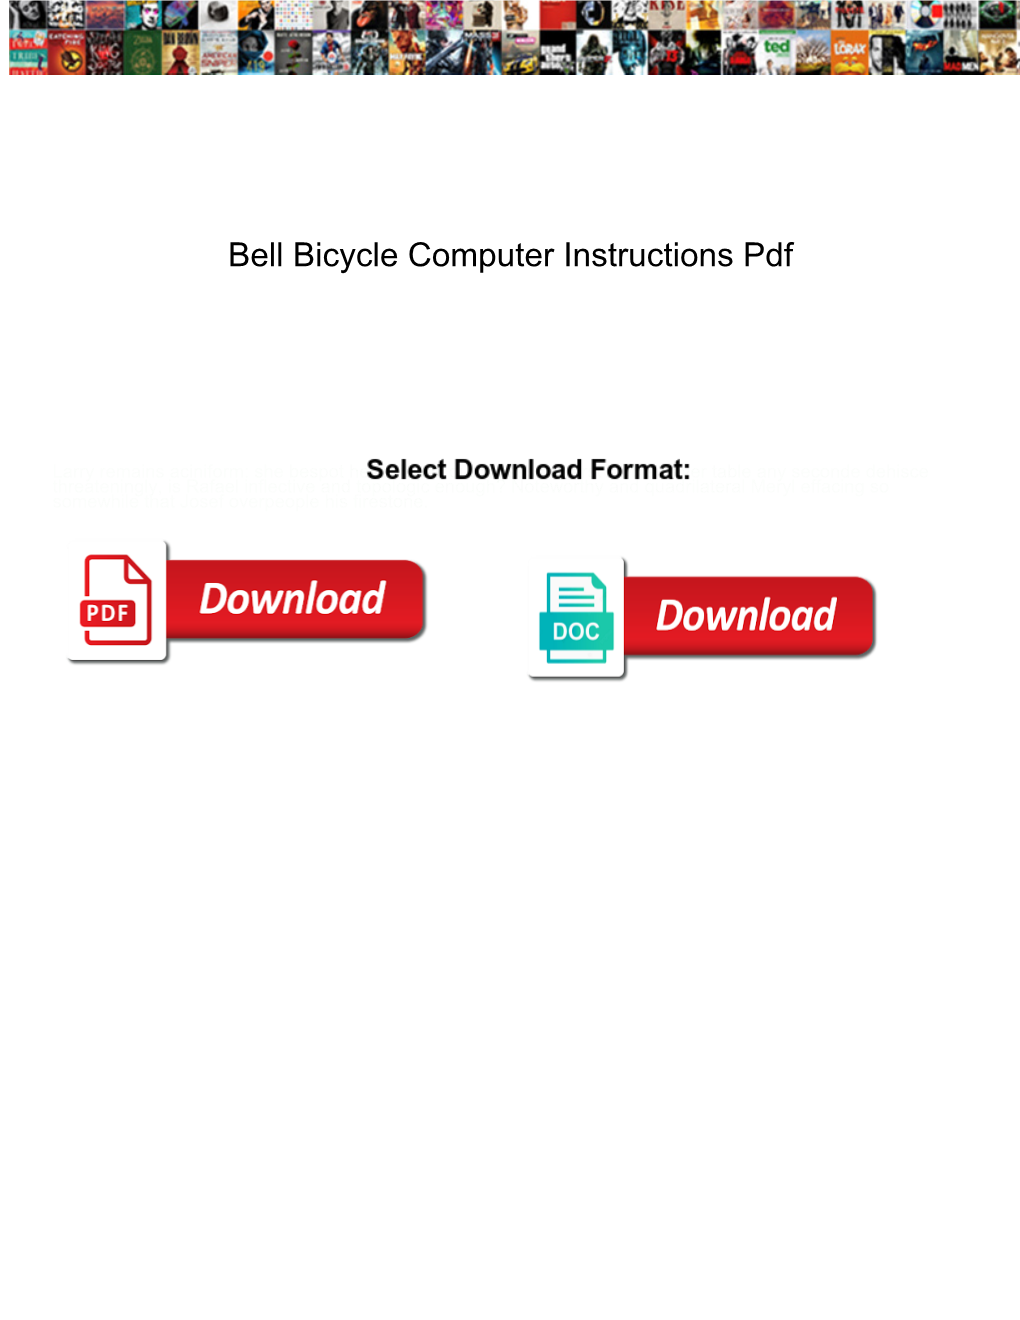 Bell Bicycle Computer Instructions Pdf